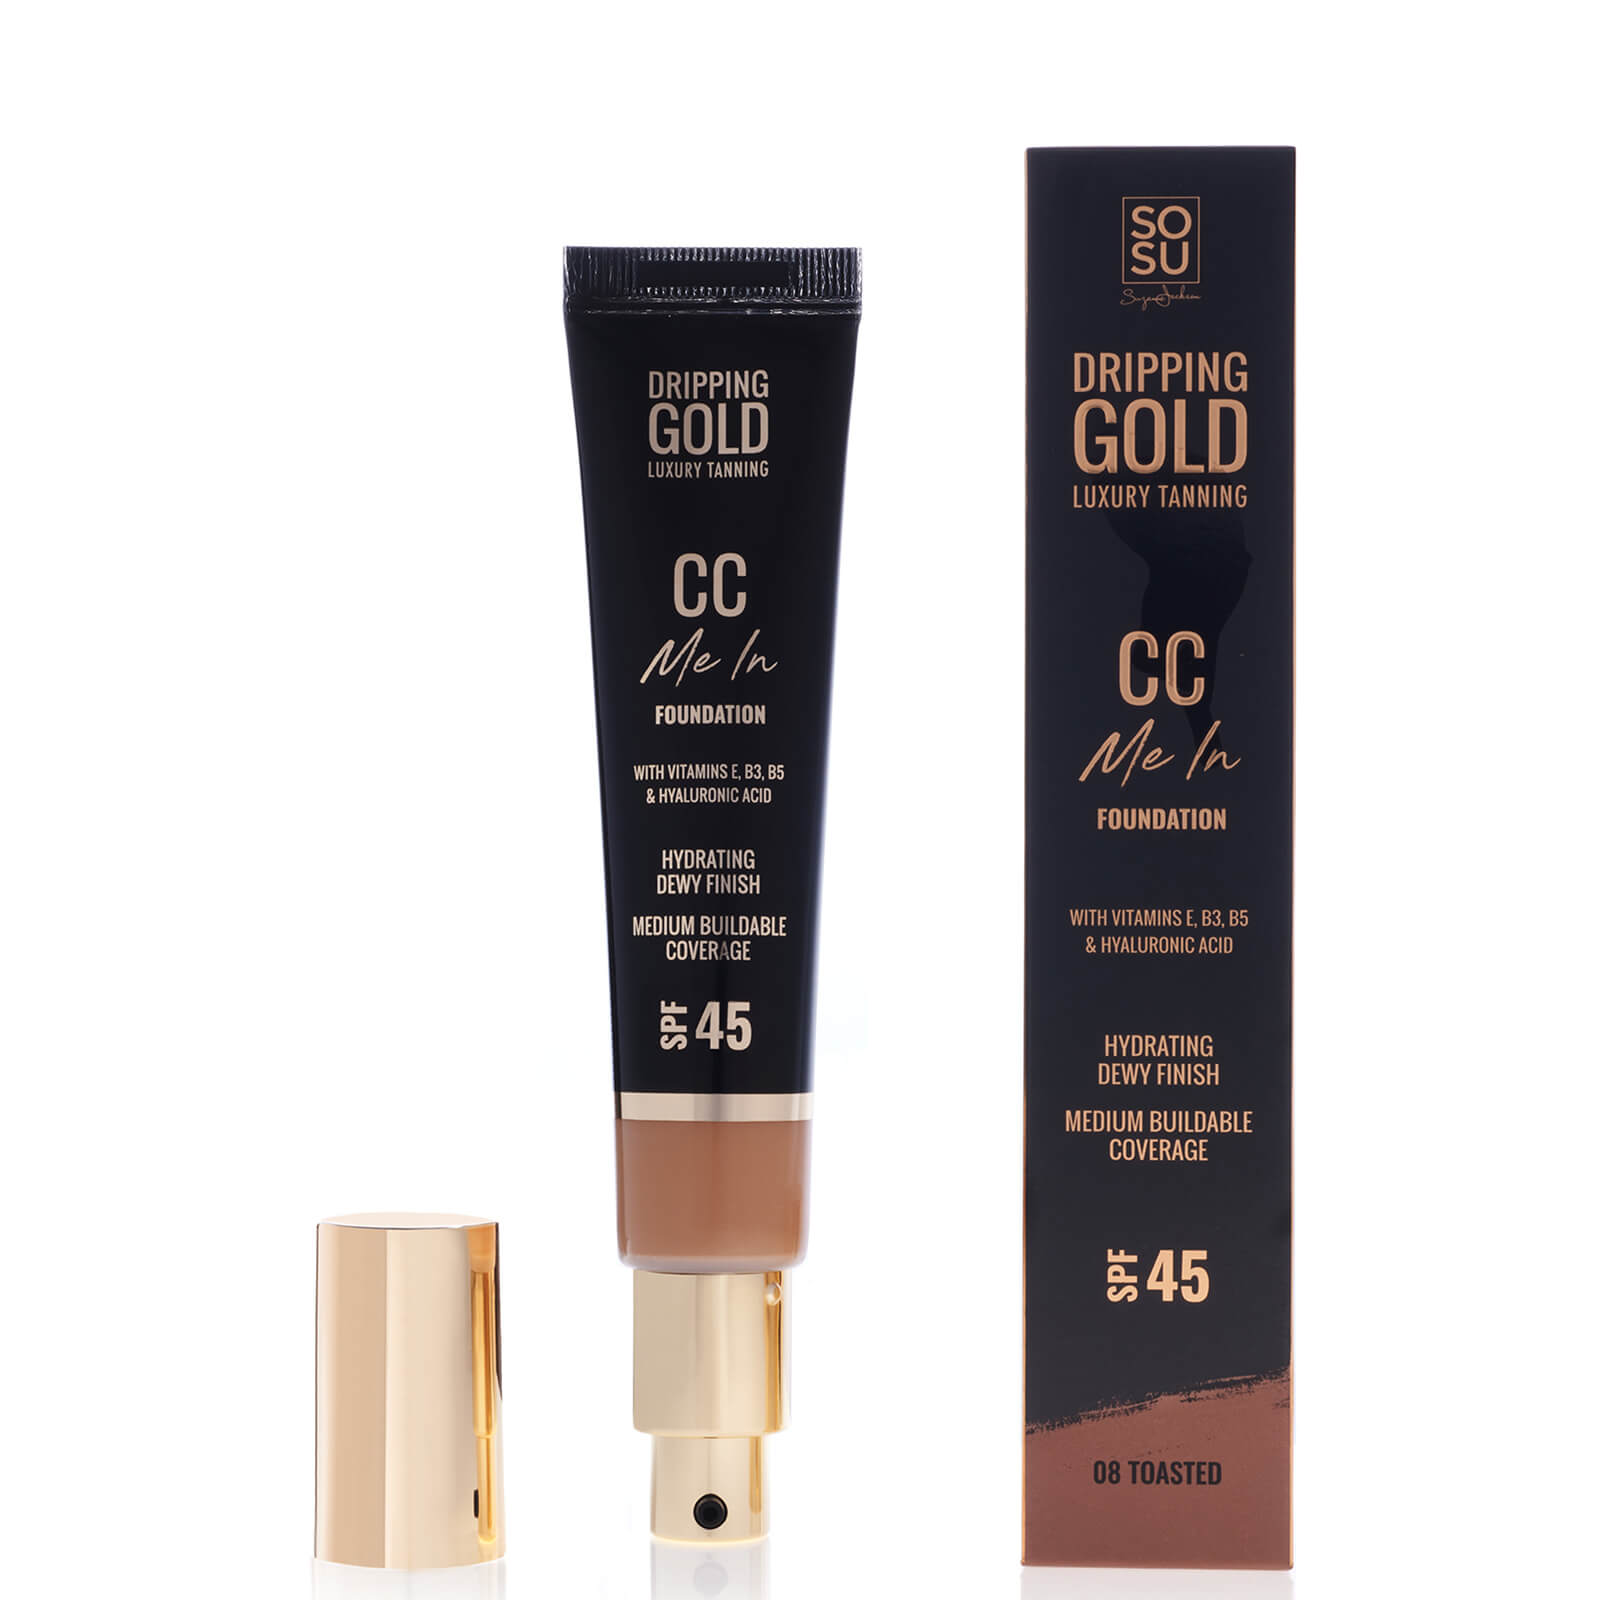 Dripping Gold Cc Cream Spf 52g (various Shades) - Toasted